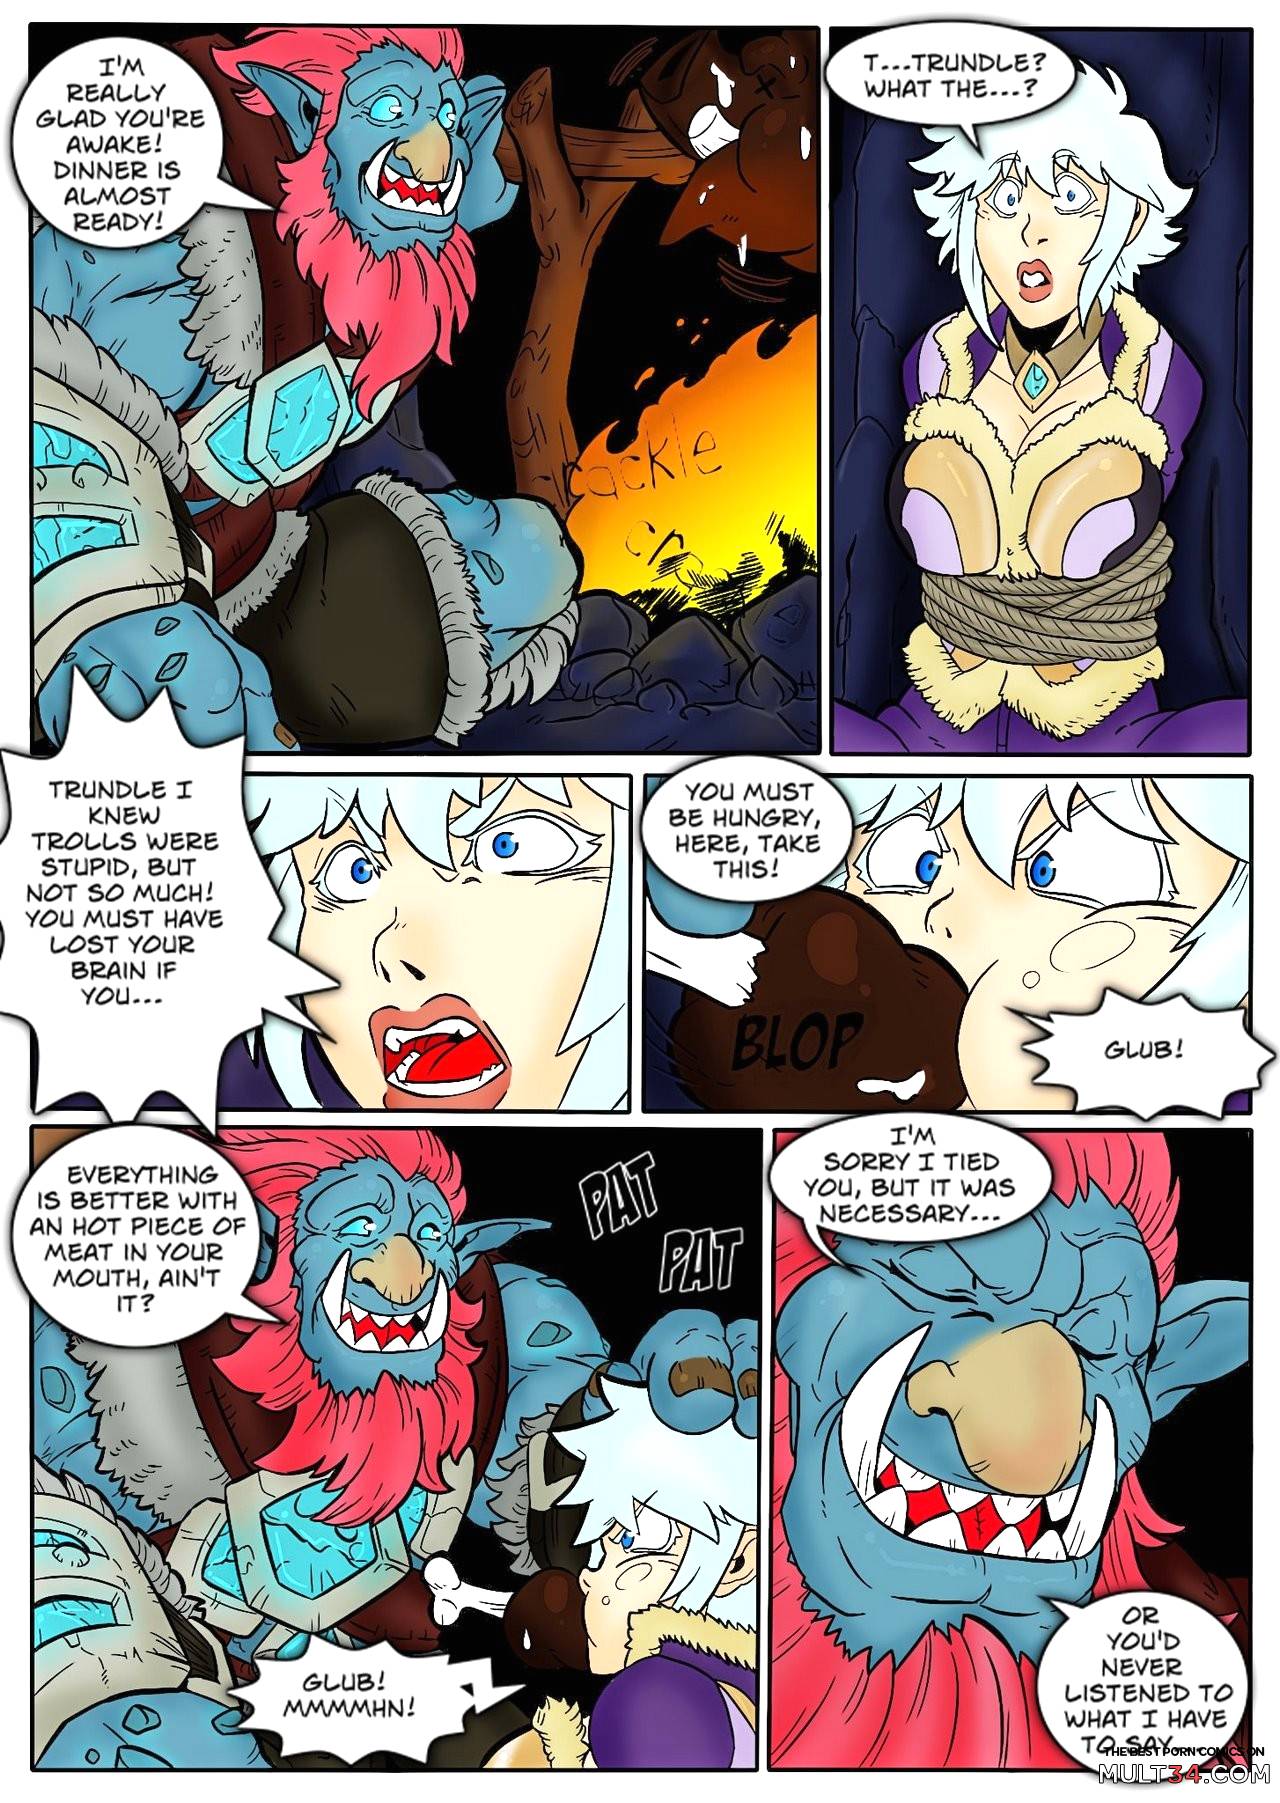 Tales of the Troll King ch. 1 - 3 ] [Colorized] page 22